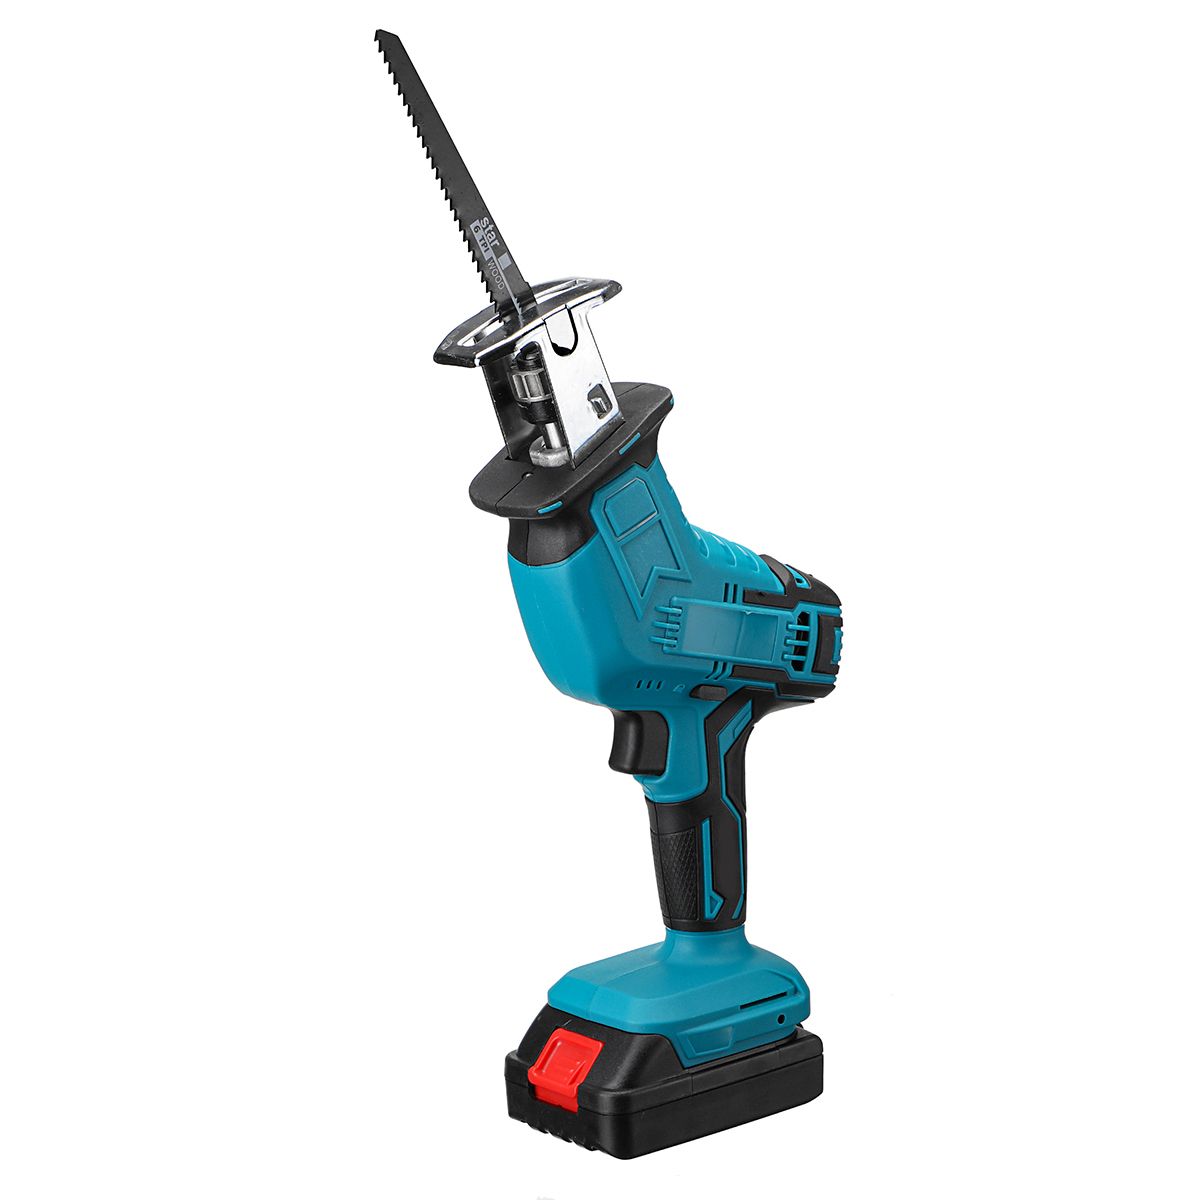 21V-Cordless-Reciprocating-Saw-Electric-Sabre-Saw-Woodworking-Wood-Metal-Cutting-Tool-1762480